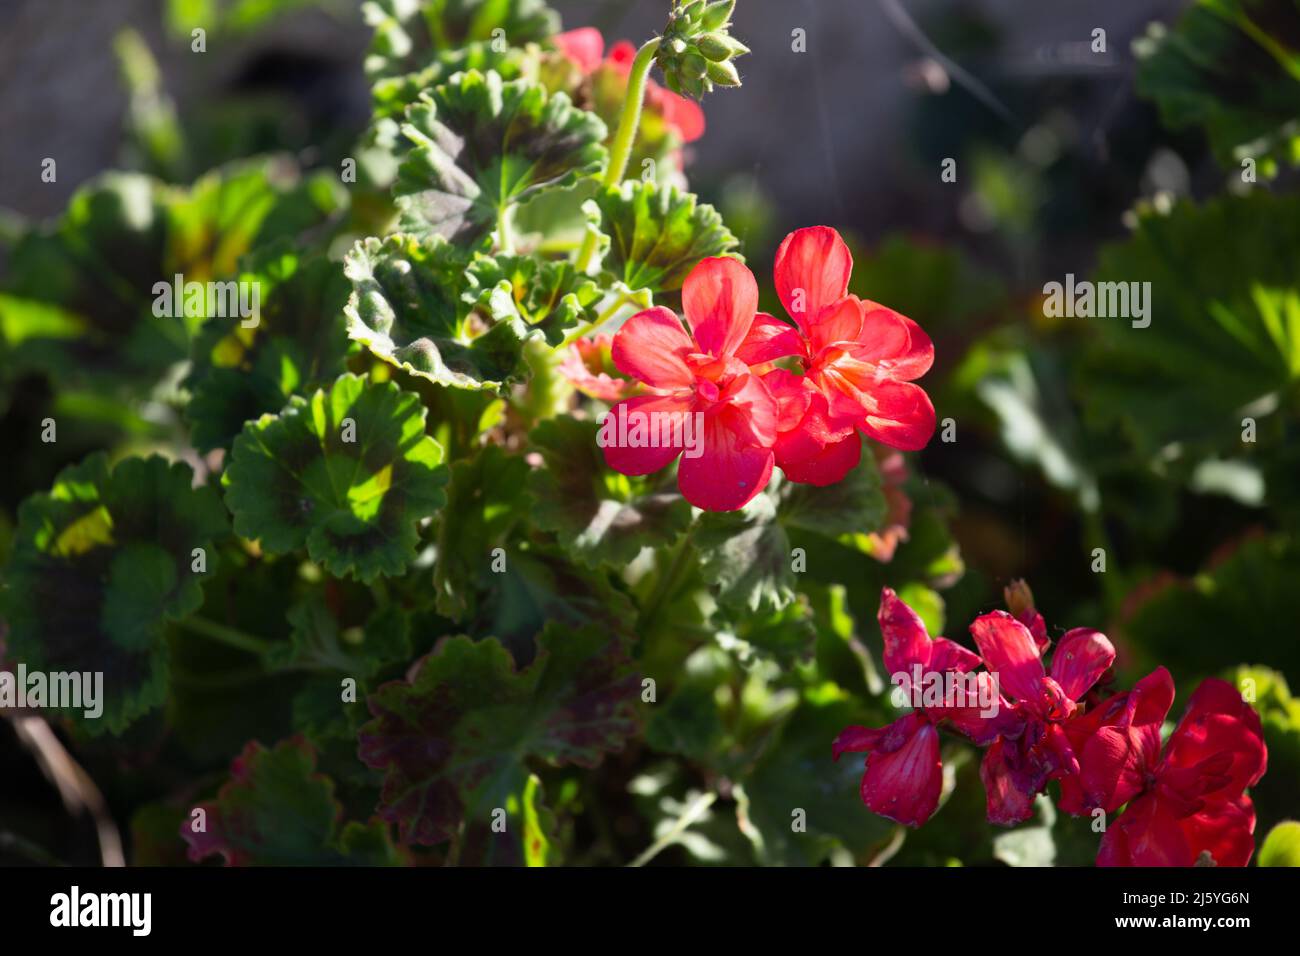 Red geraniums, also known as cranesbill outside in the garden in sunlight. Pelargonium lateripes Stock Photo